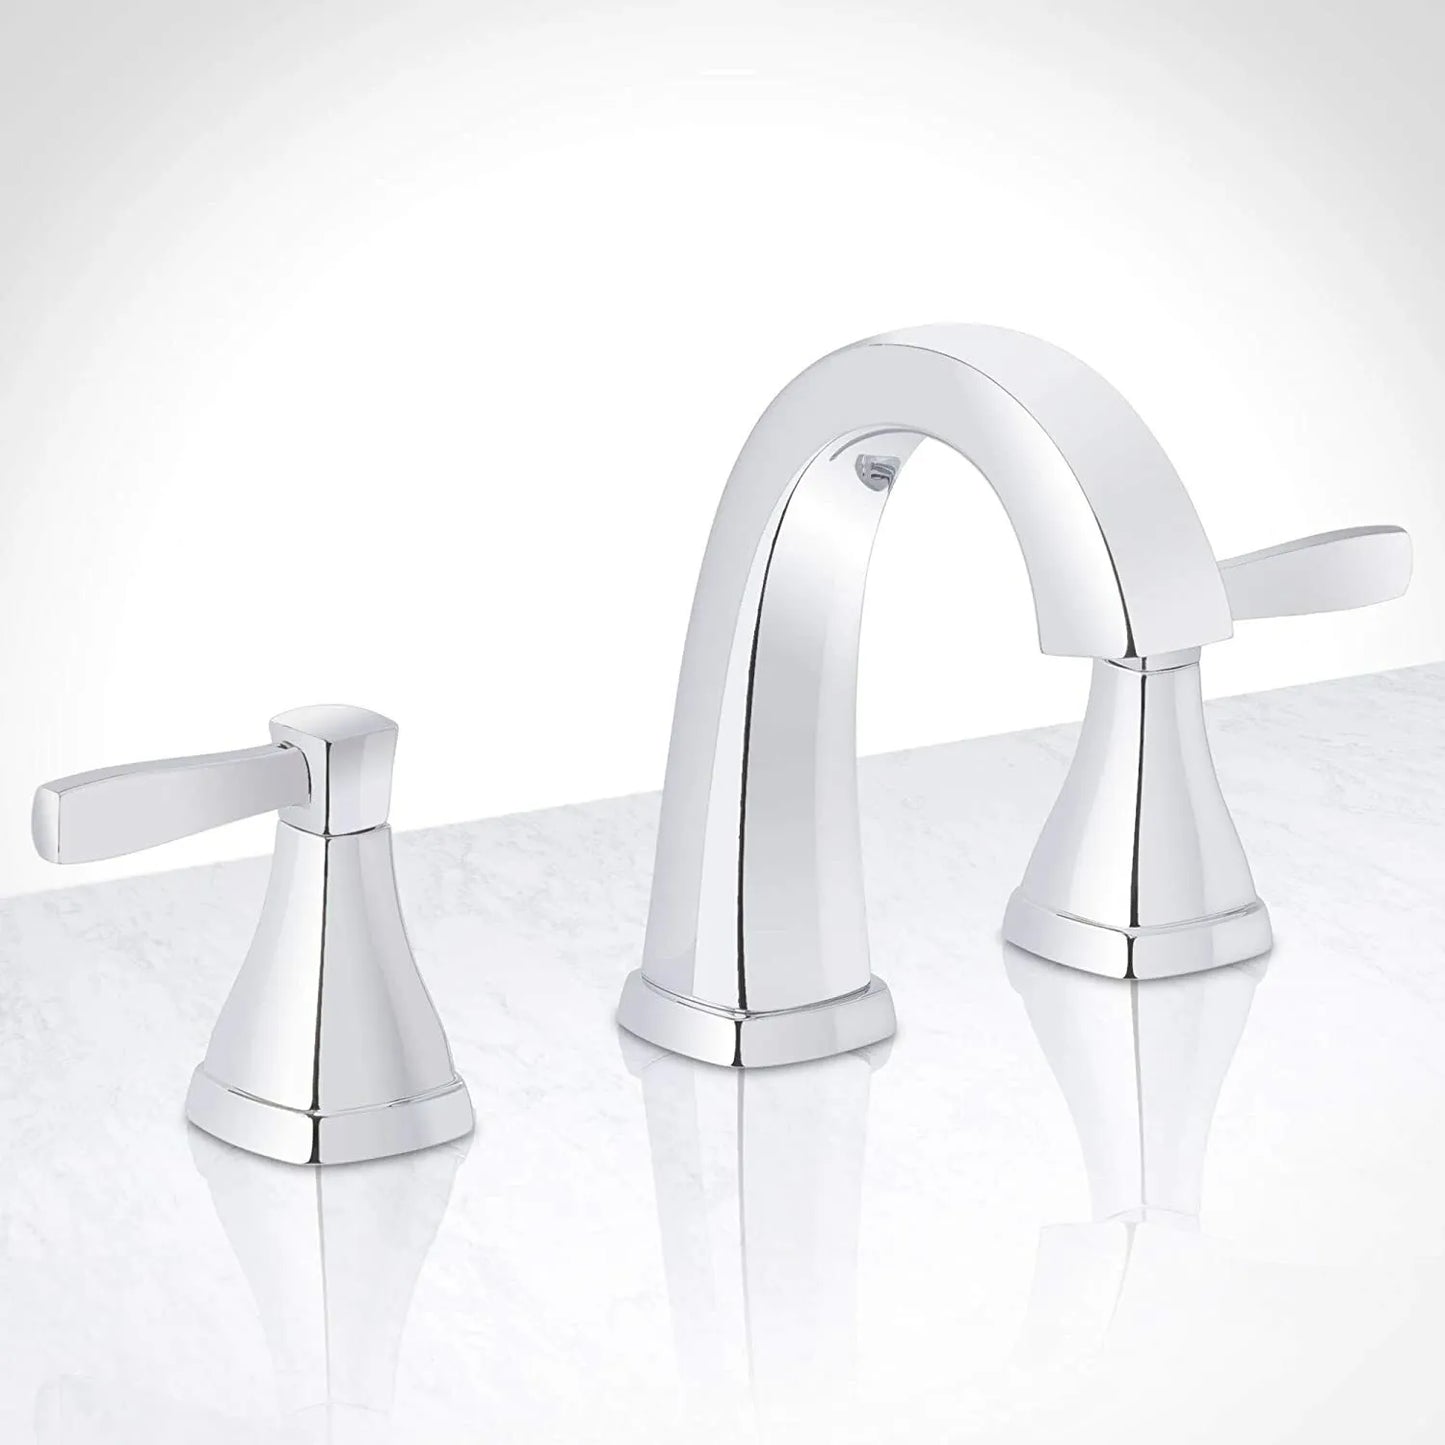 Miseno MNO641CP Elysa 1.2 GPM Widespread Bathroom Faucet with Push-Pop Drain Assembly - Chrome